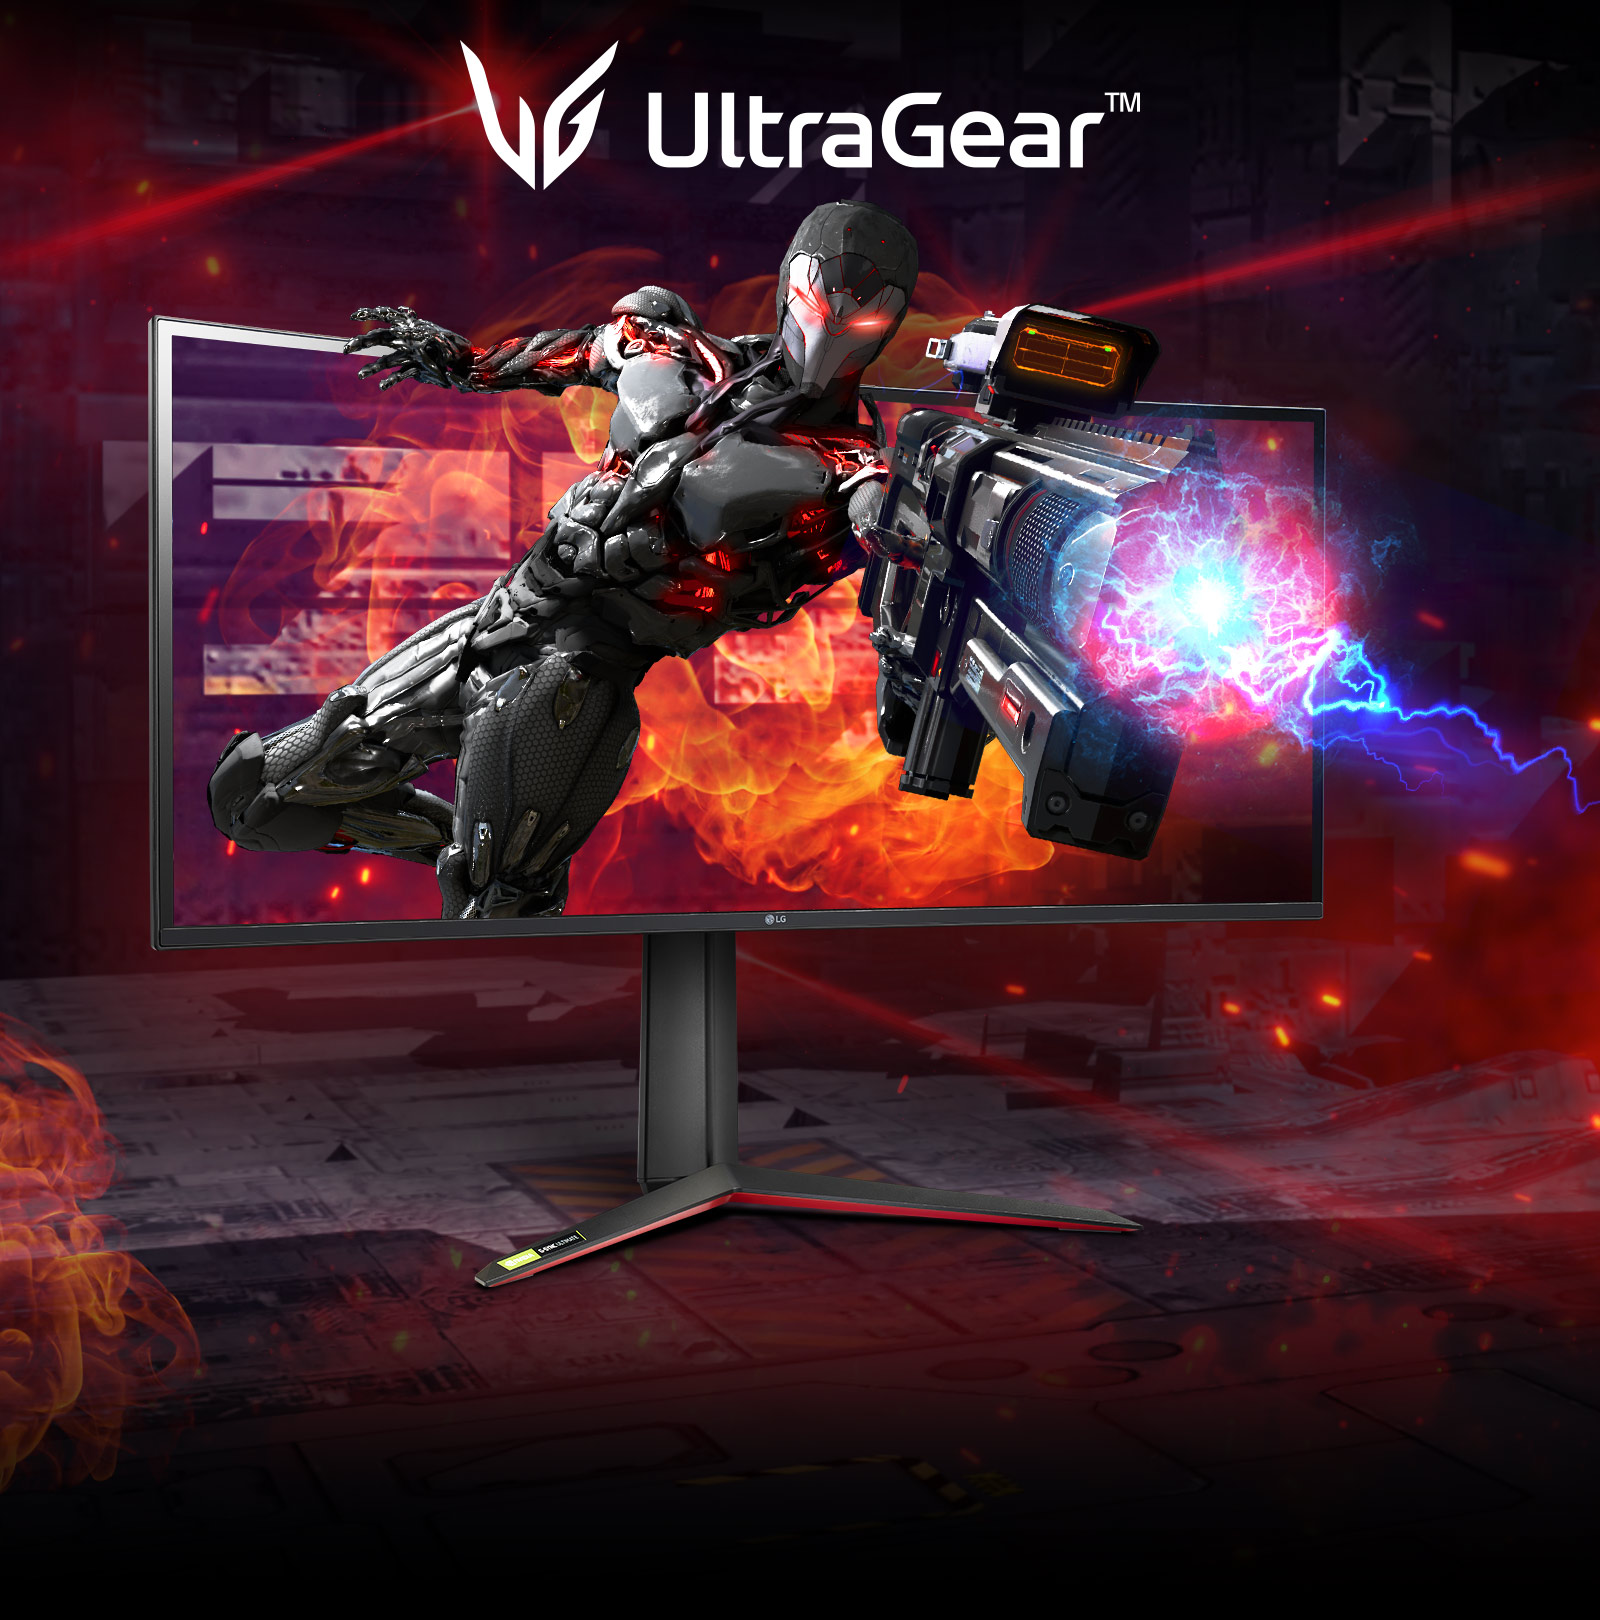 Image of LG UltraGear Monitor as The Powerful Gear for Your Gaming